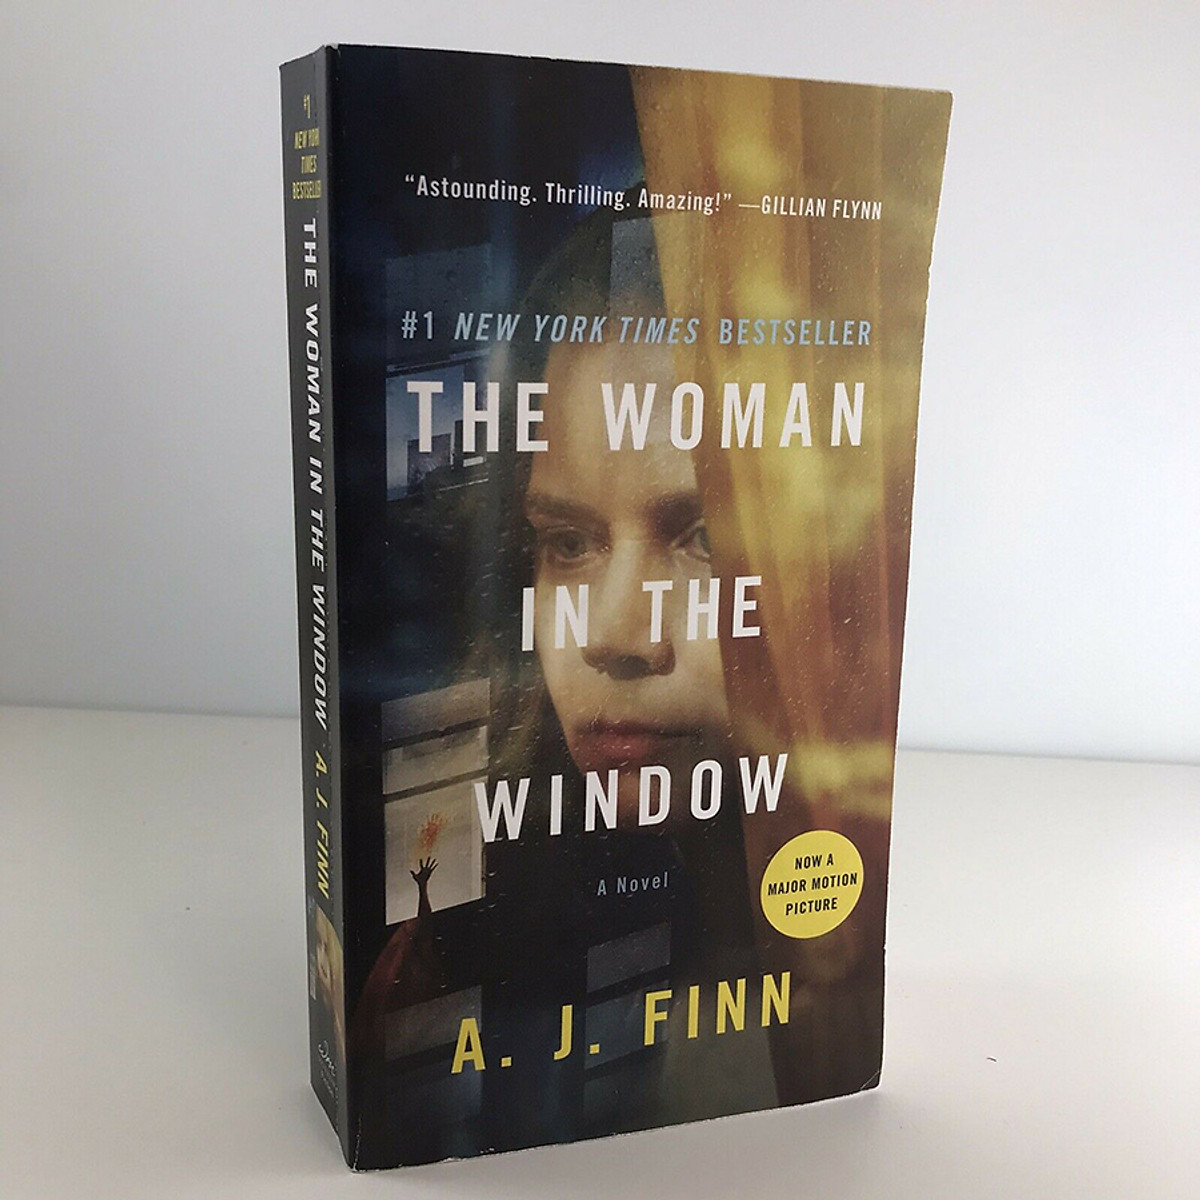 The Woman in the Window : A Novel (Now a Major Motion Picture)